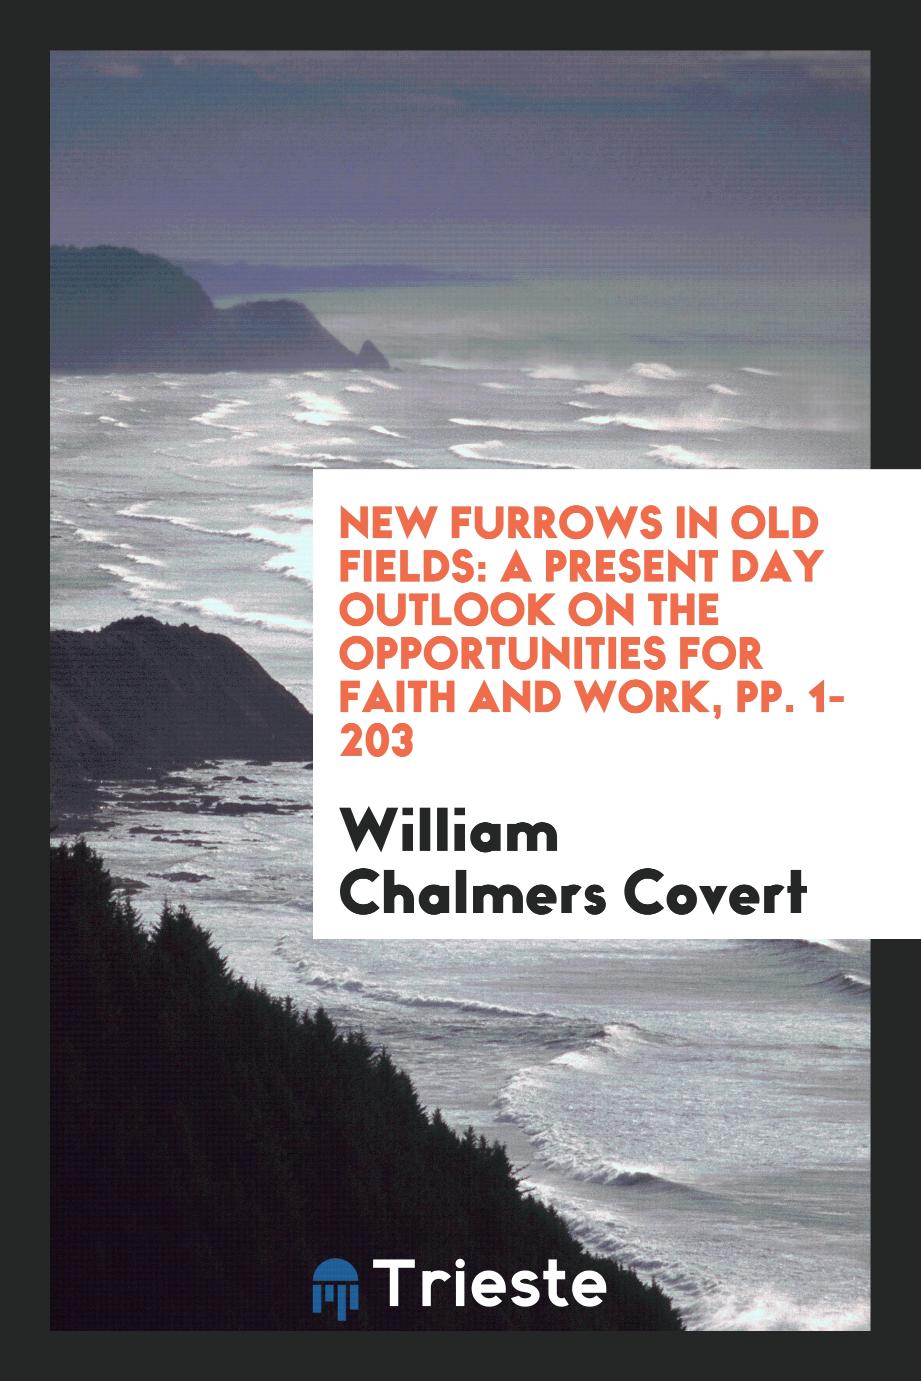 New Furrows in Old Fields: A Present Day Outlook on the Opportunities for Faith and Work, pp. 1-203